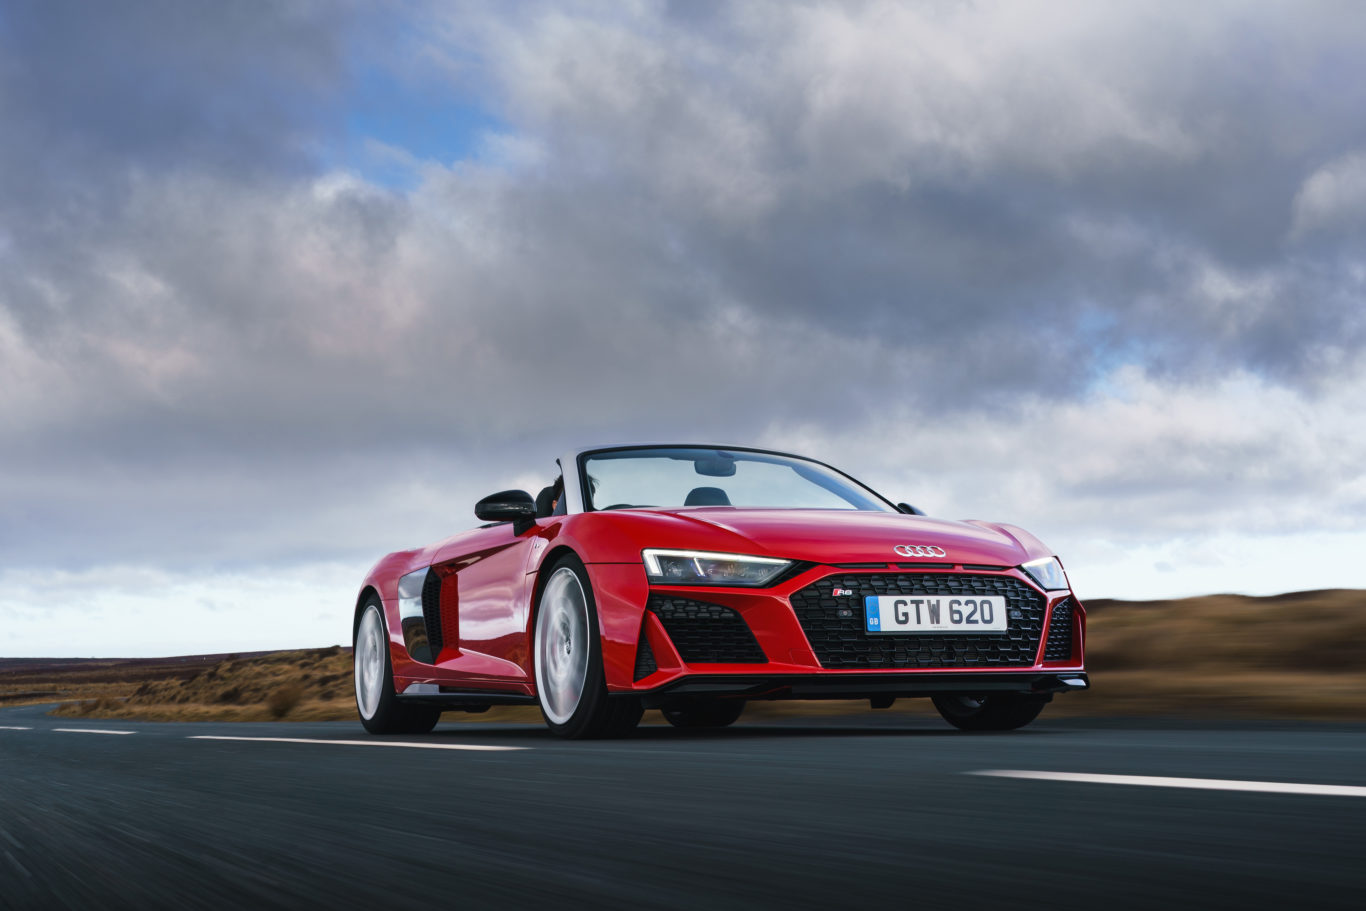 The new R8 features a sharper front end design